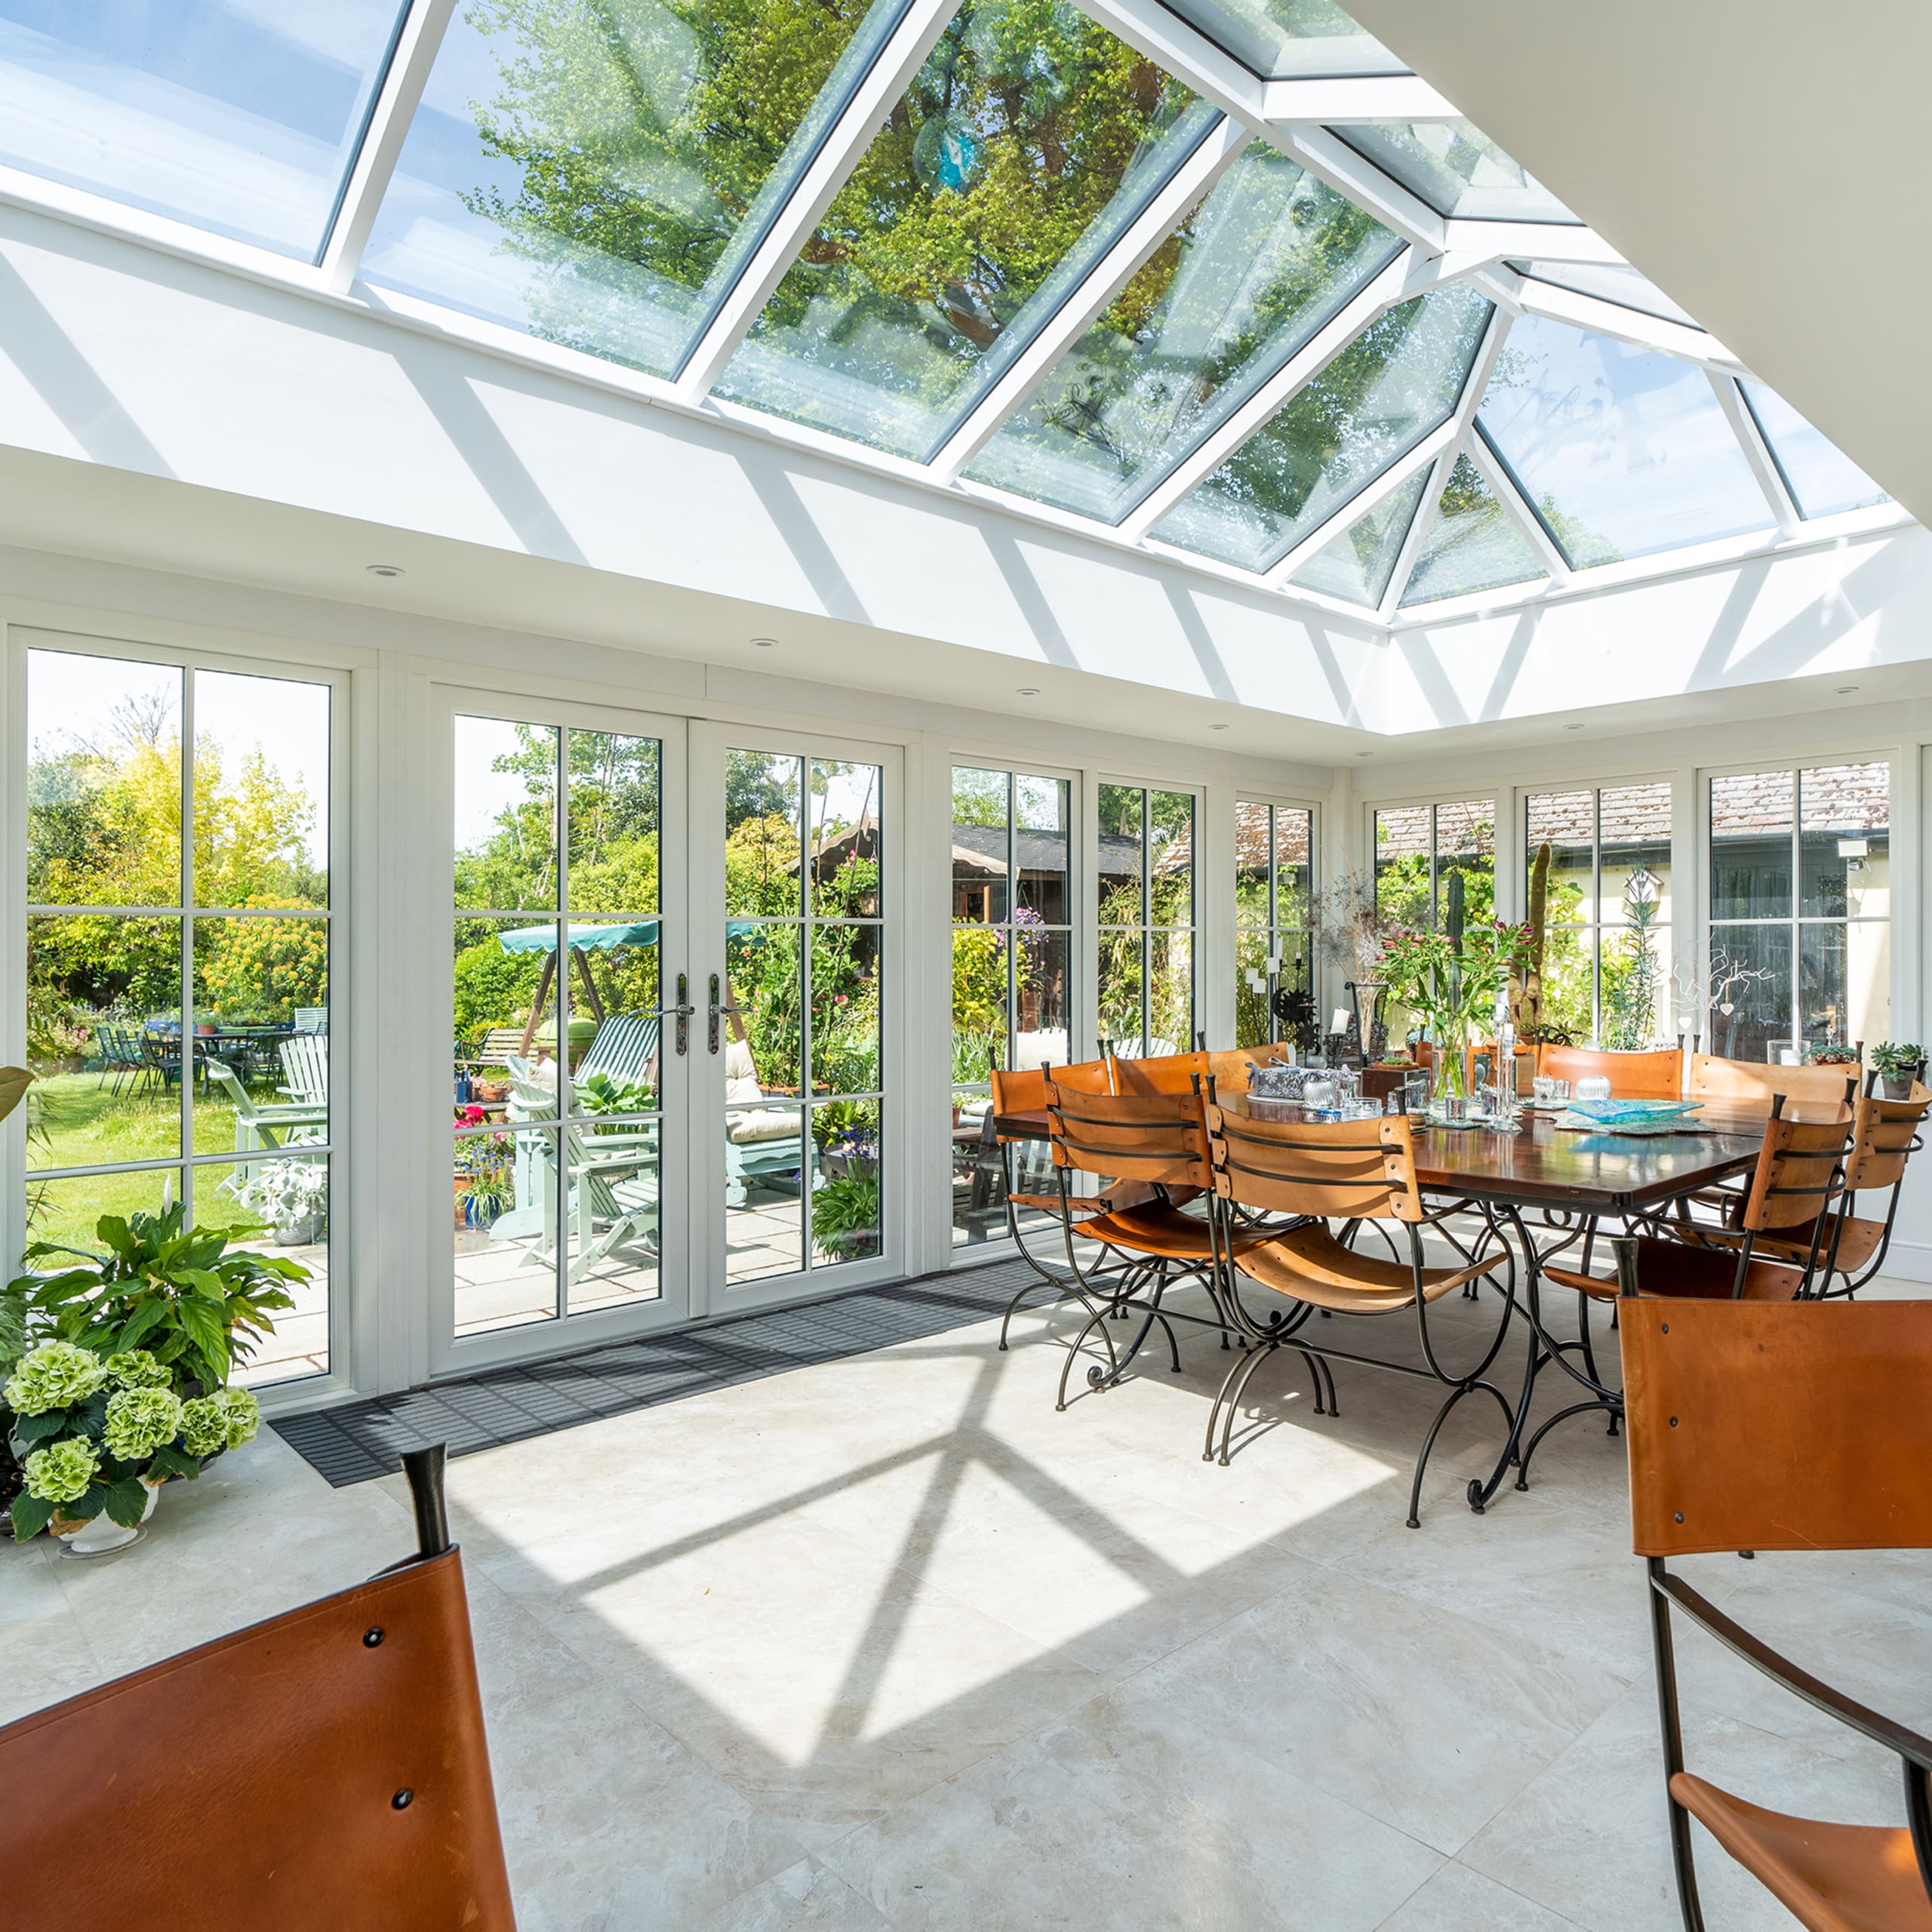 Beautiful home with stunning roof lantern orangery and traditional windows and doors.